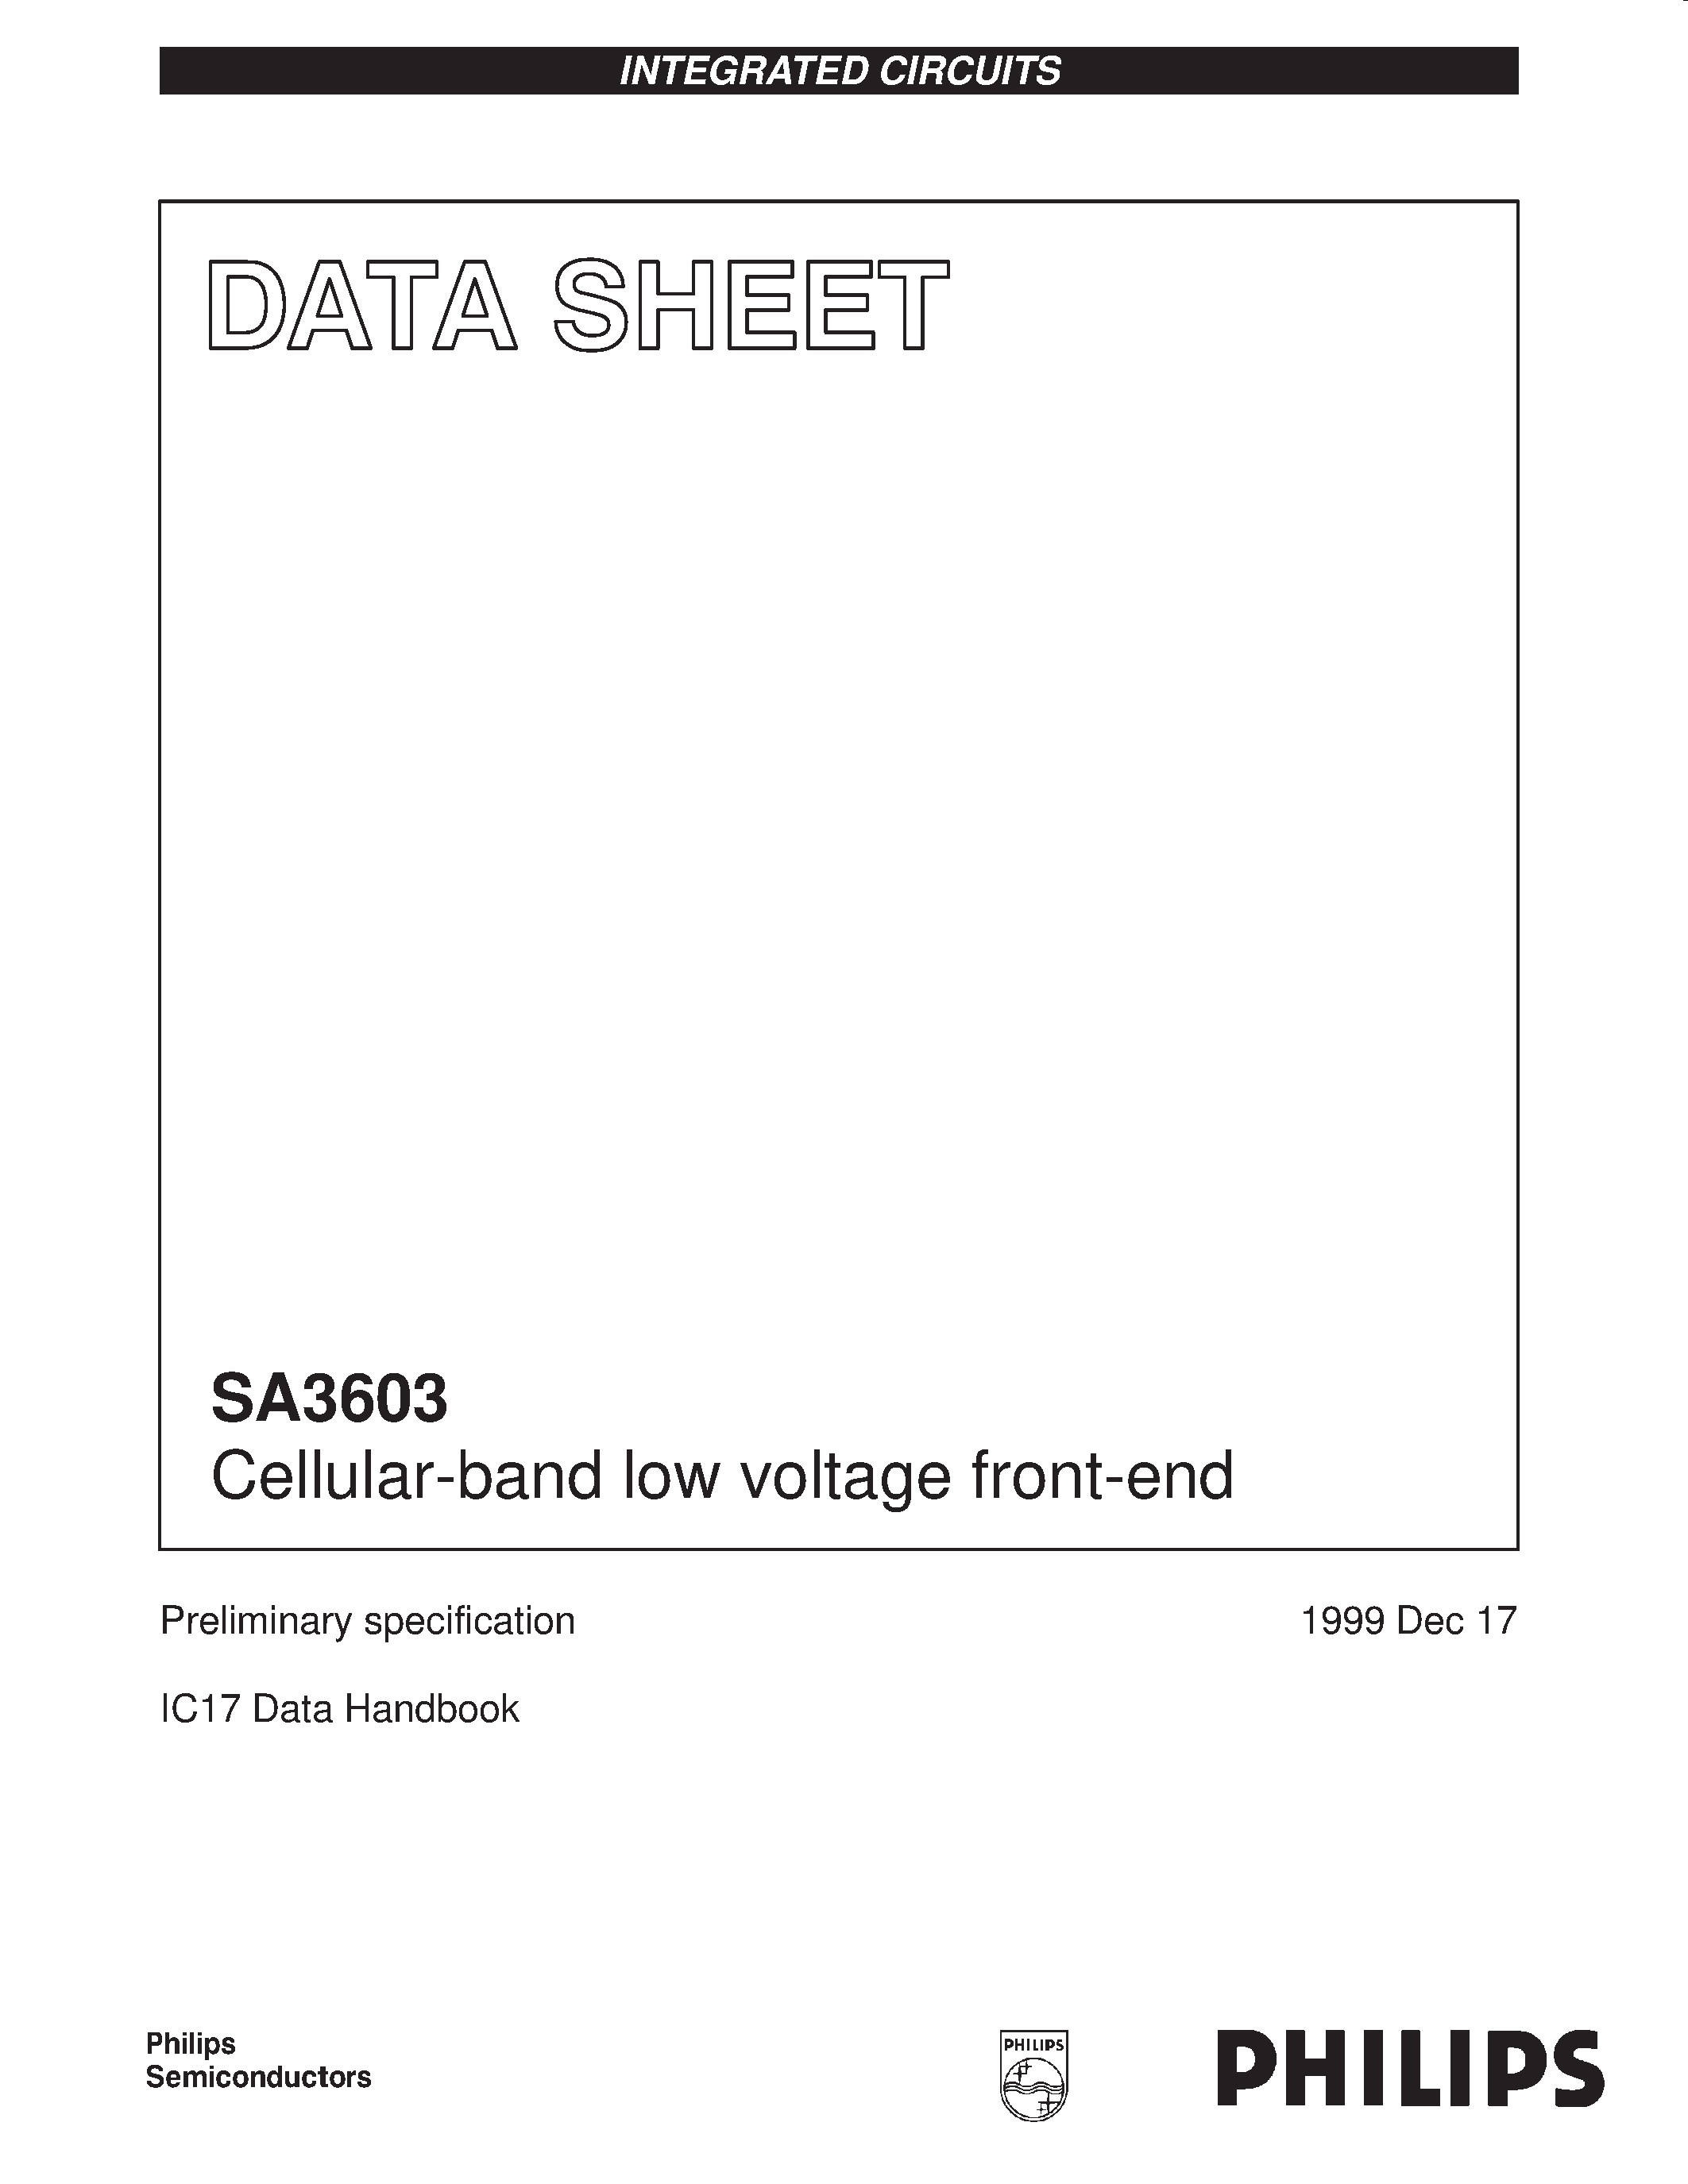 Datasheet SA3603 - Cellular-band low voltage front-end page 1